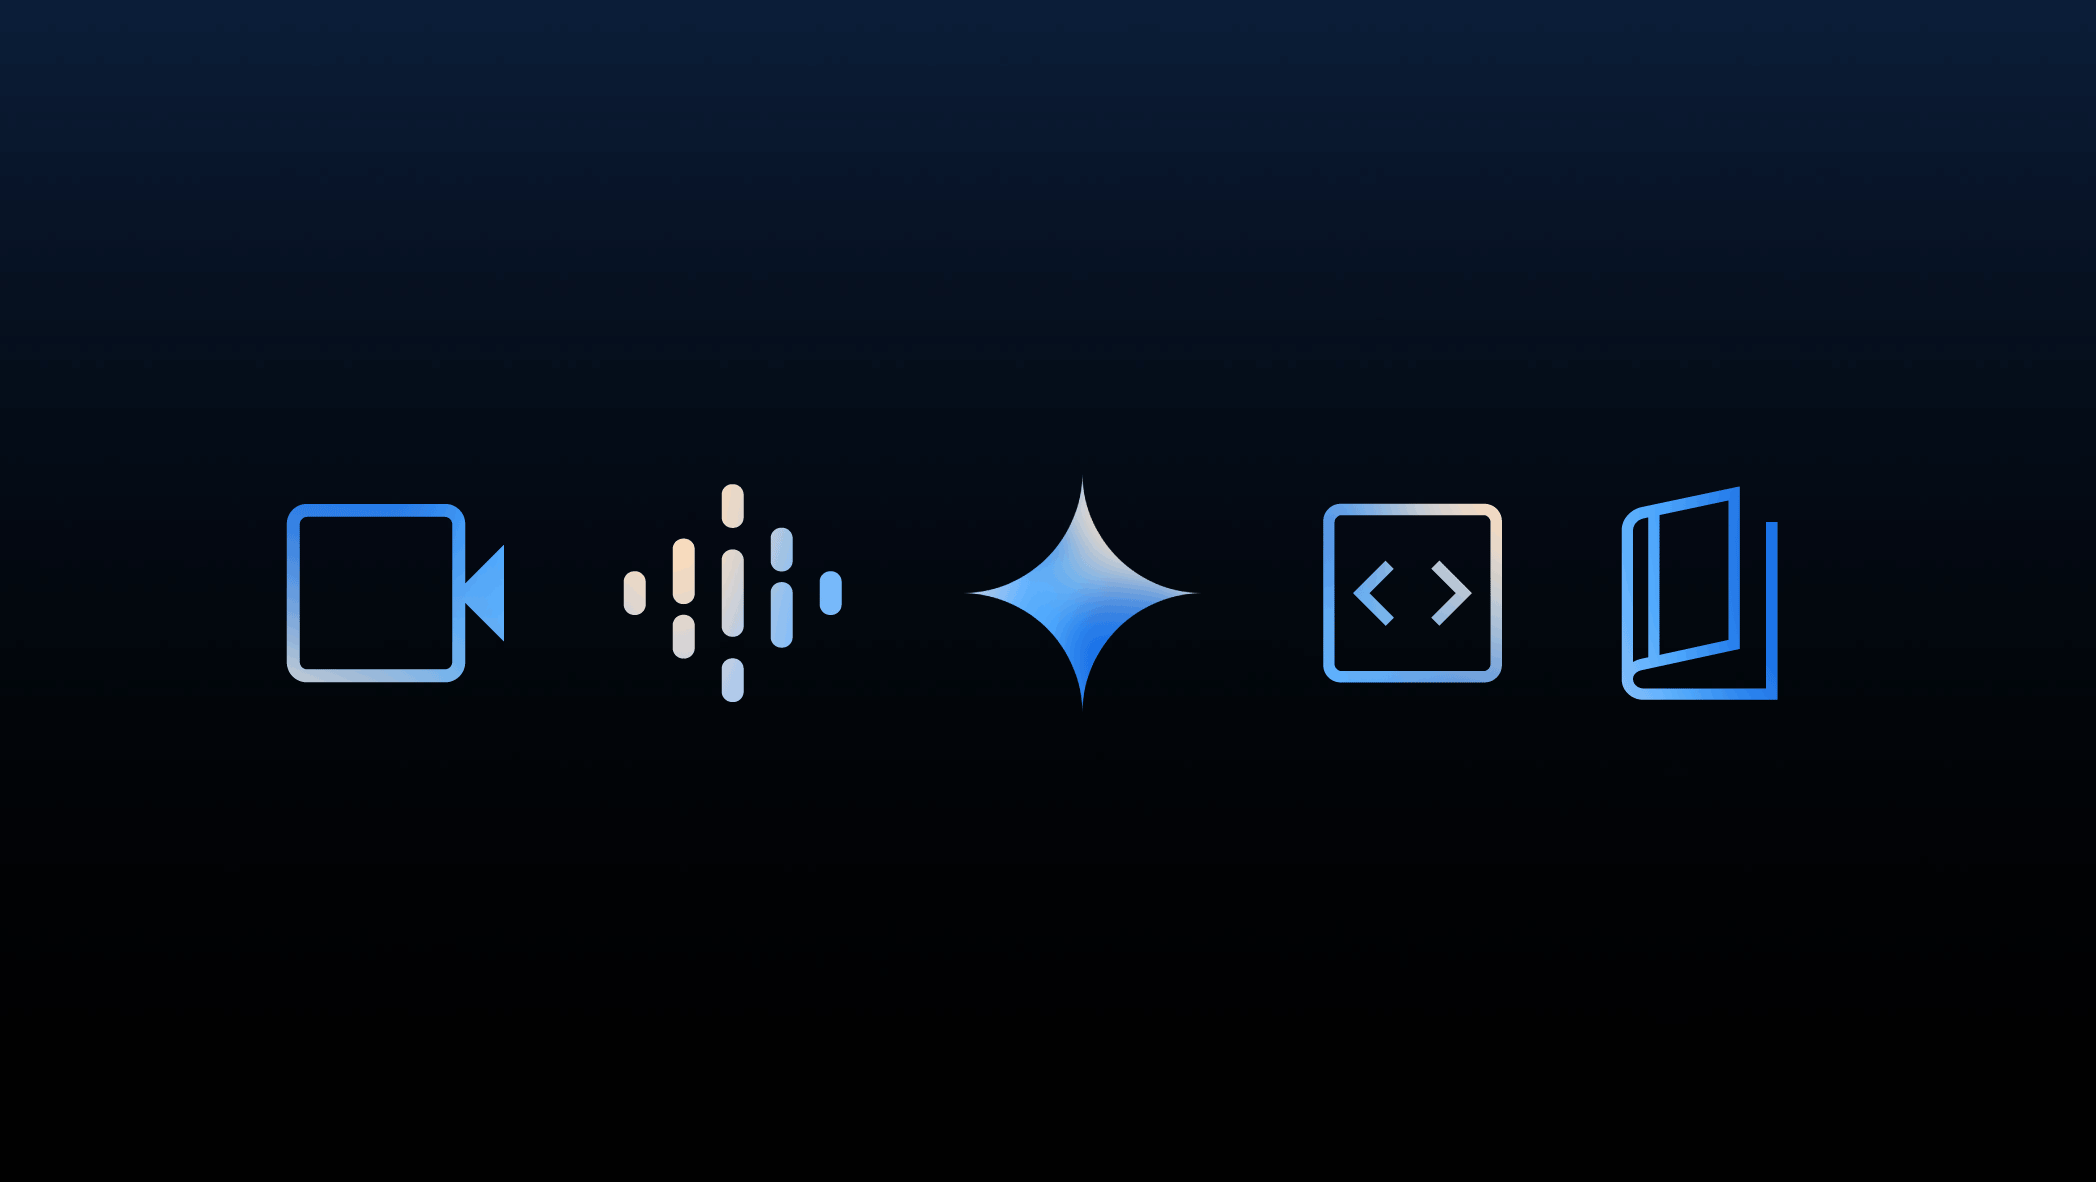 An illustration of various icons to represent tokens in context windows, including a video camera icon, a book icon, and a soundwave icon.